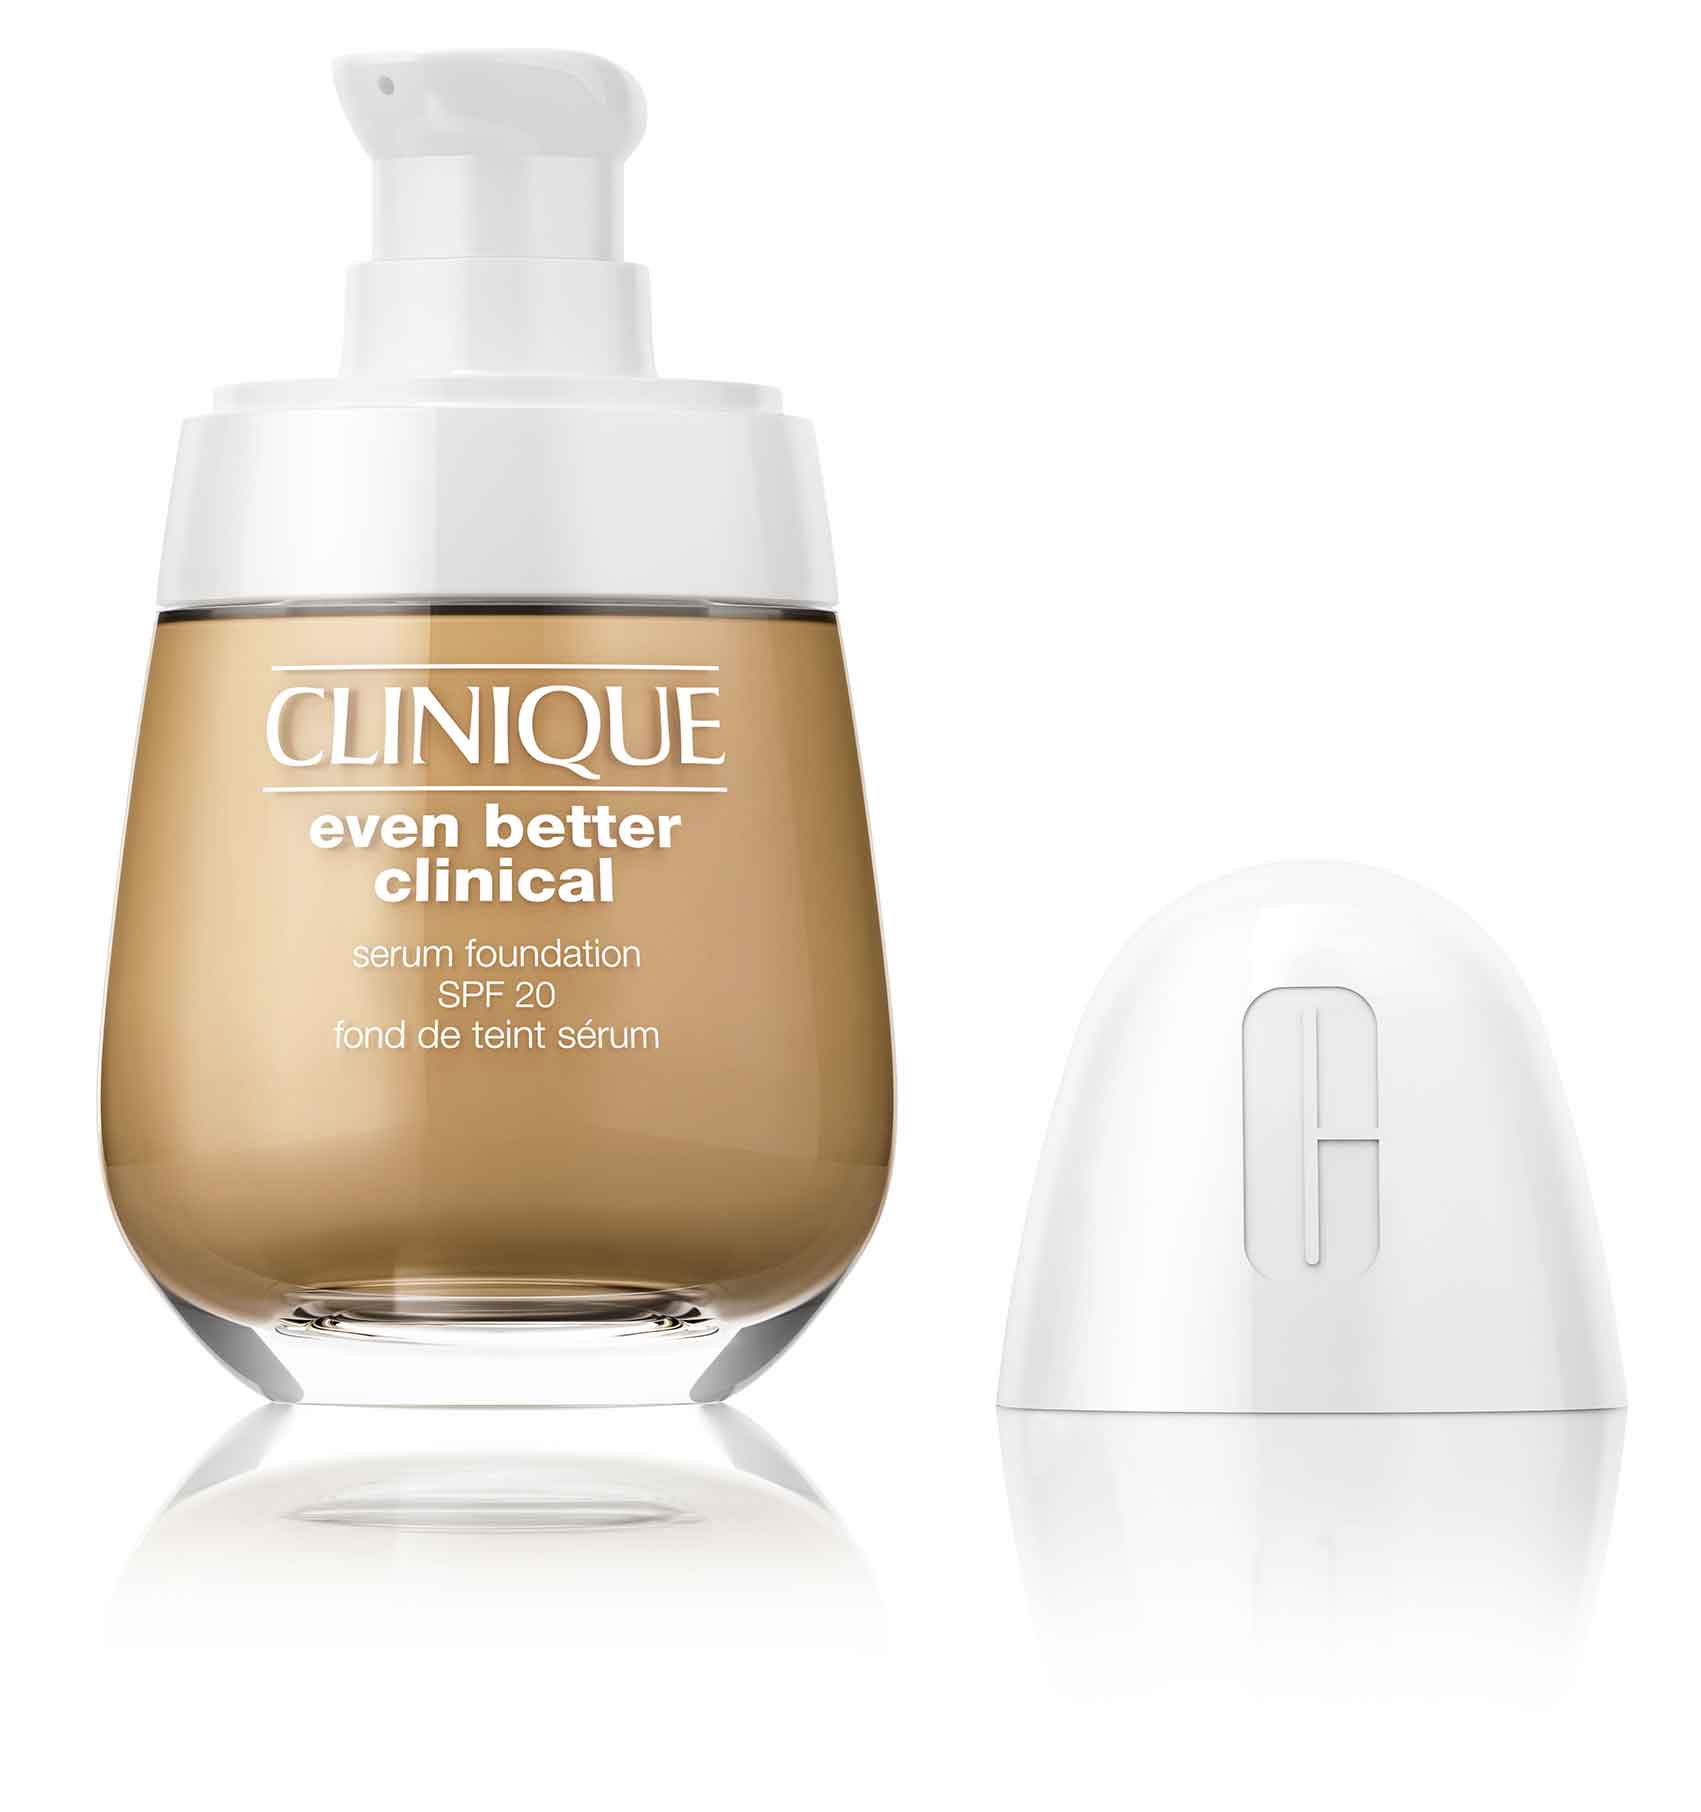 S21_ICON_EVEN_BETTER_CLINICAL_SERUM_FOUNDATION_TAWNIEDBEIGE_CAP_WITH_BOTTLE_30ML_INTL_KY19-מייקאפ